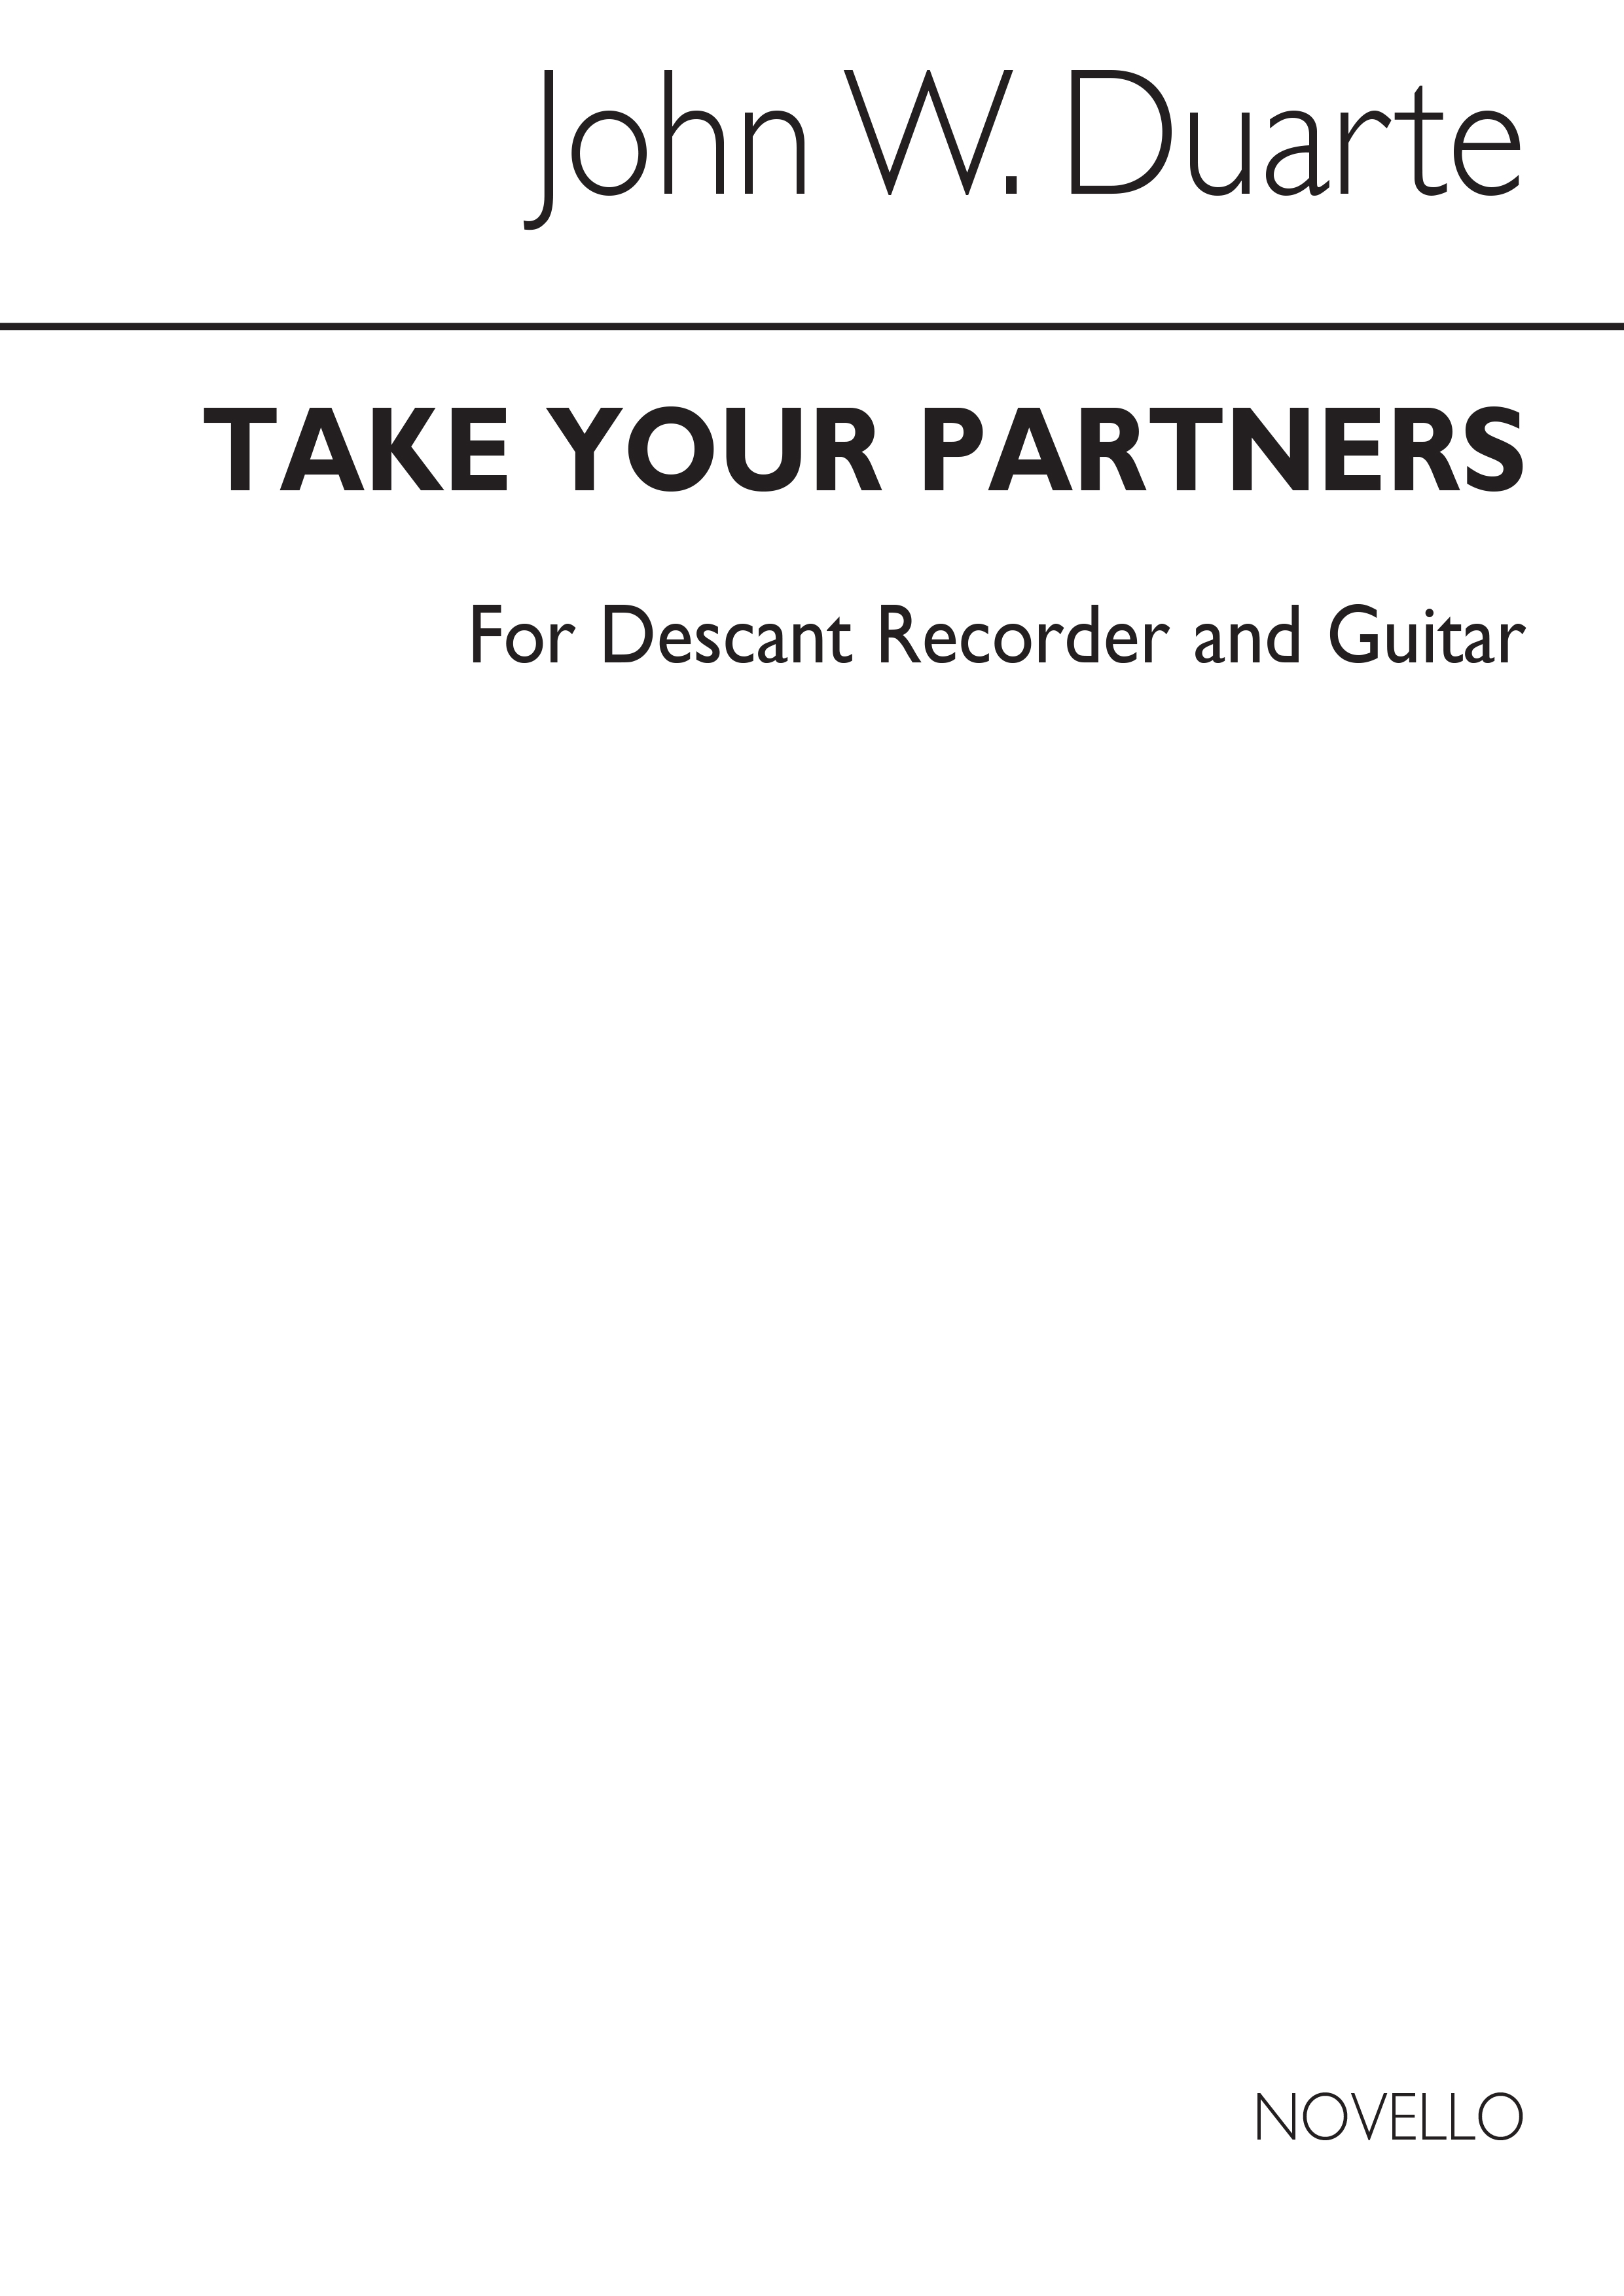 Duarte: Take Your Partners for Descant Recorder and Guitar